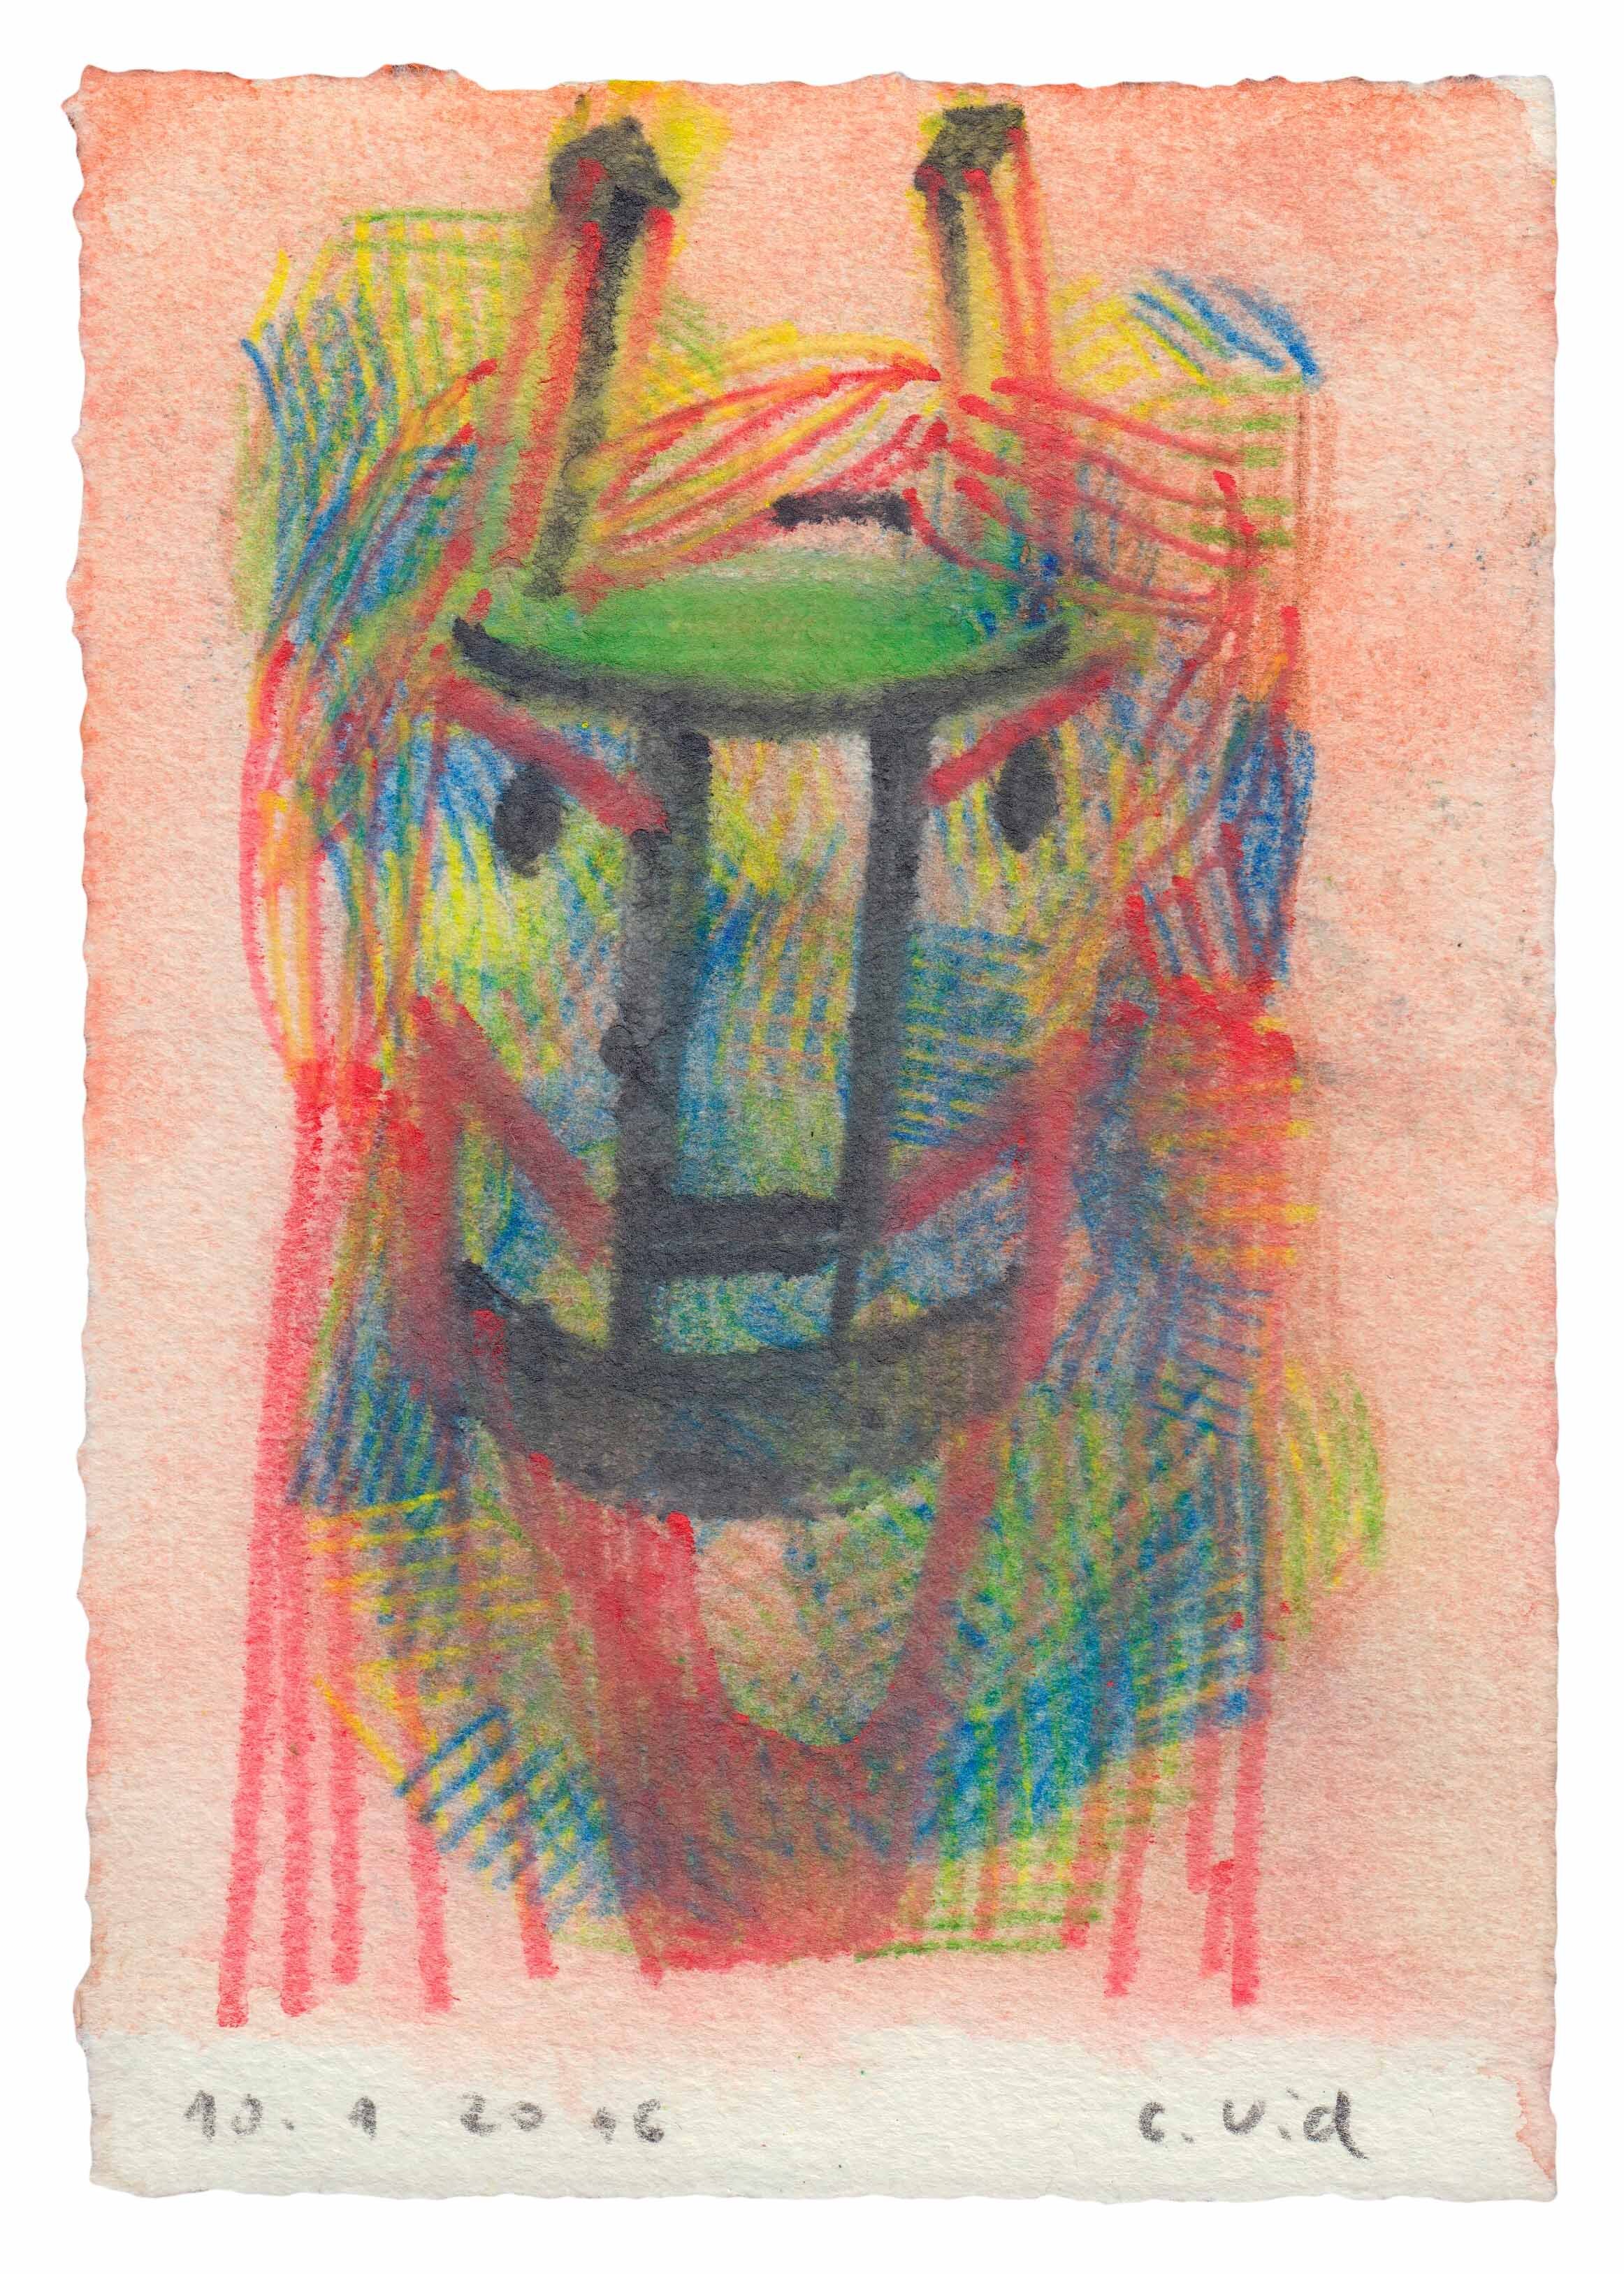  13 × 9 cm, Pencil and Aquarell on Paper, 2016 